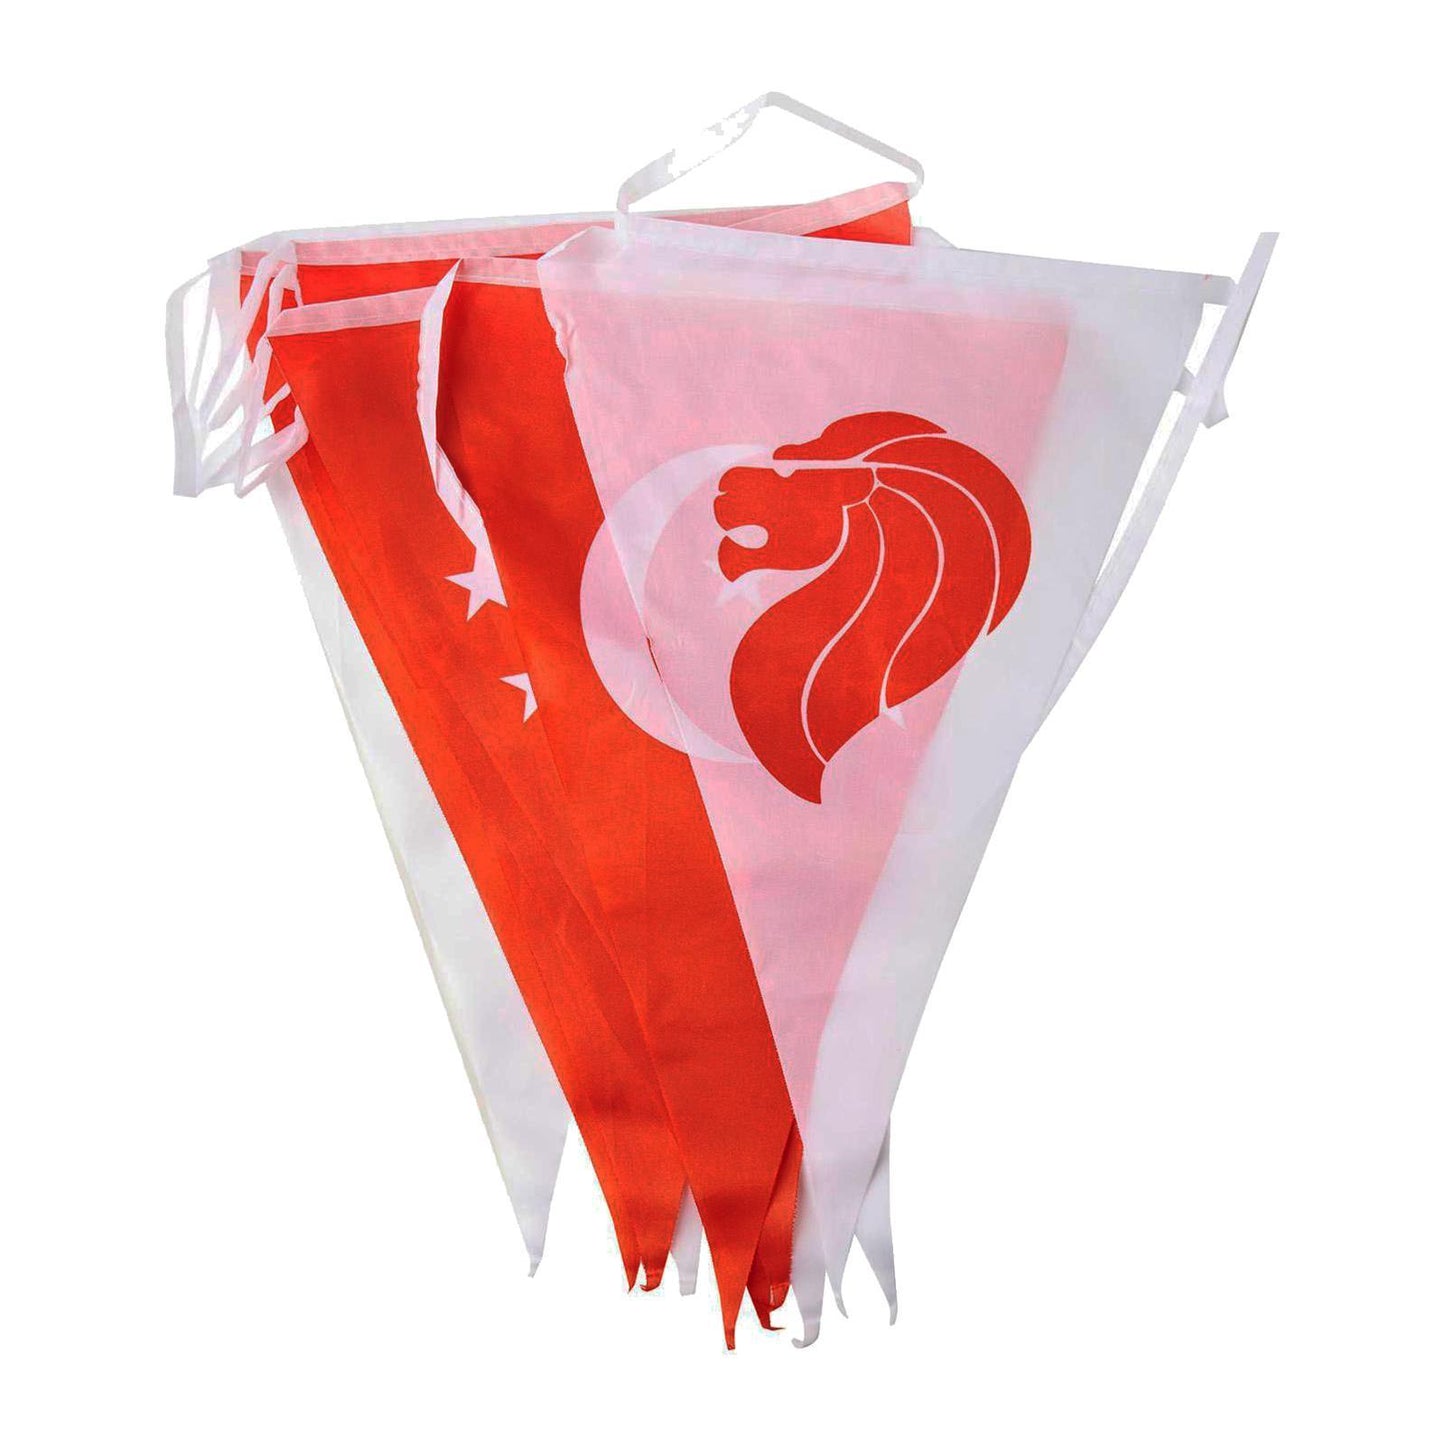 Singapore Triangle Flag Bunting (Red/White)